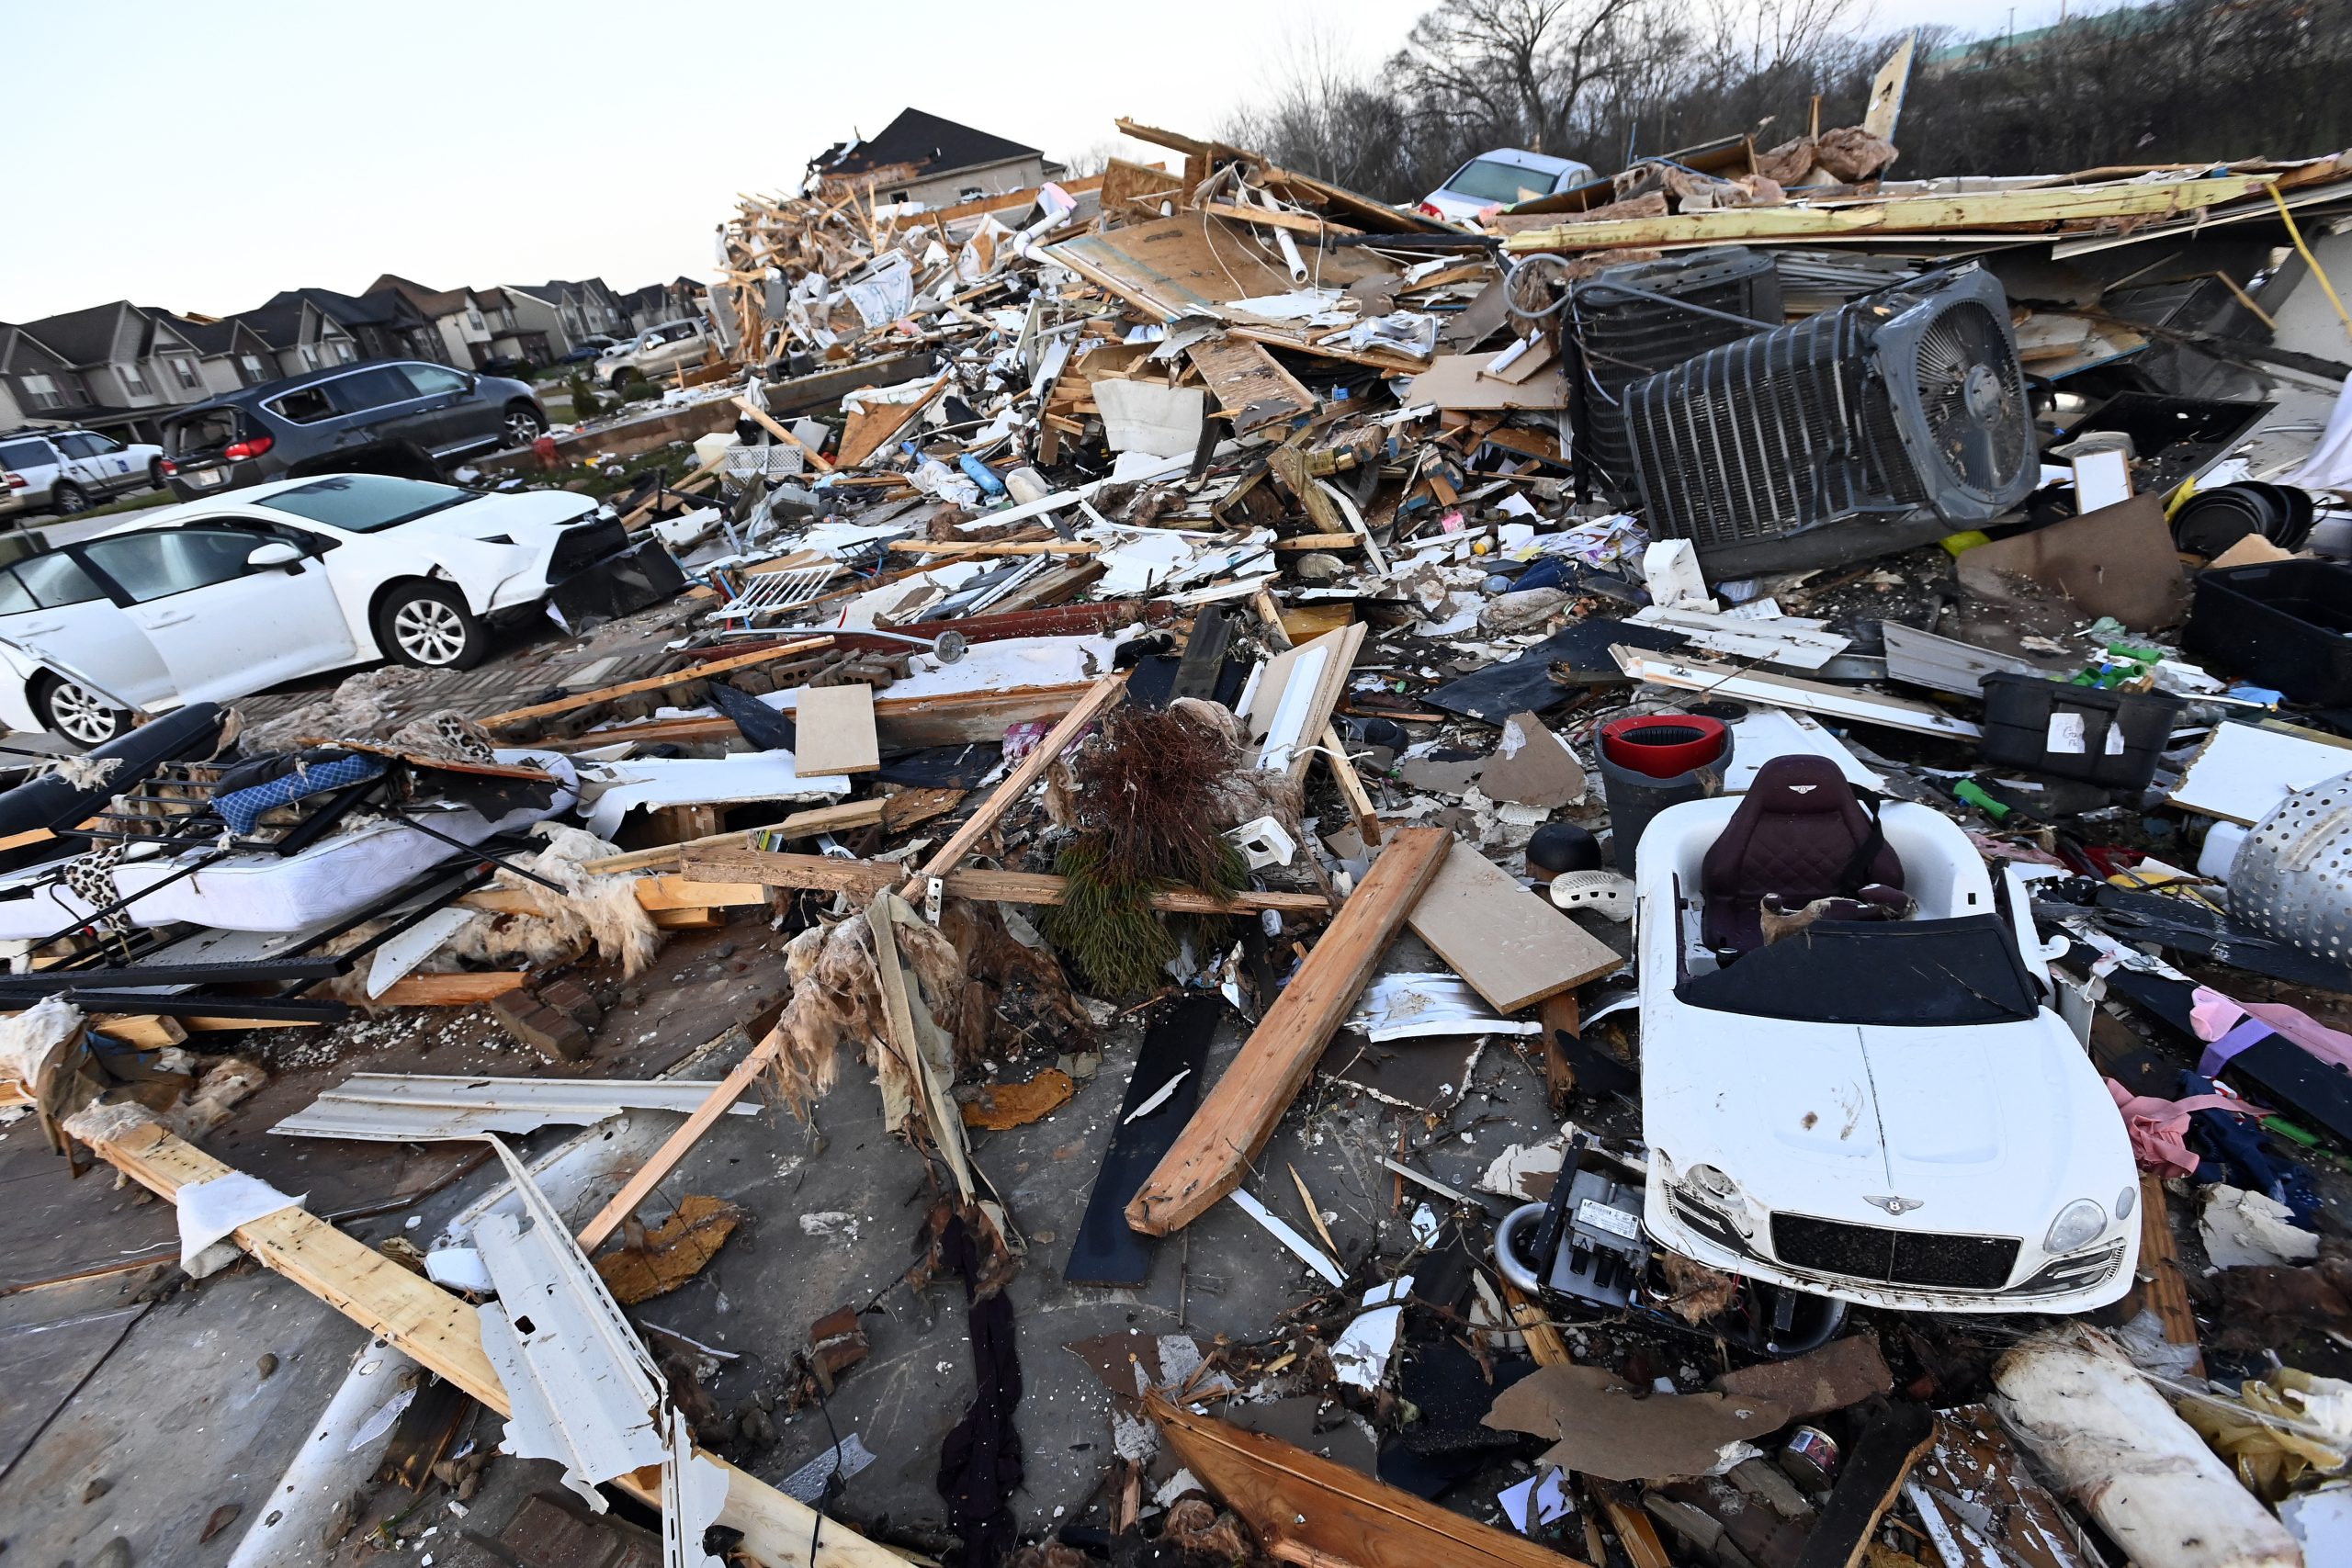 Over 60 hospitalizations were recorded after the tornadoes in Clarksville, TN wreaked havoc. (Photo: WGCU)